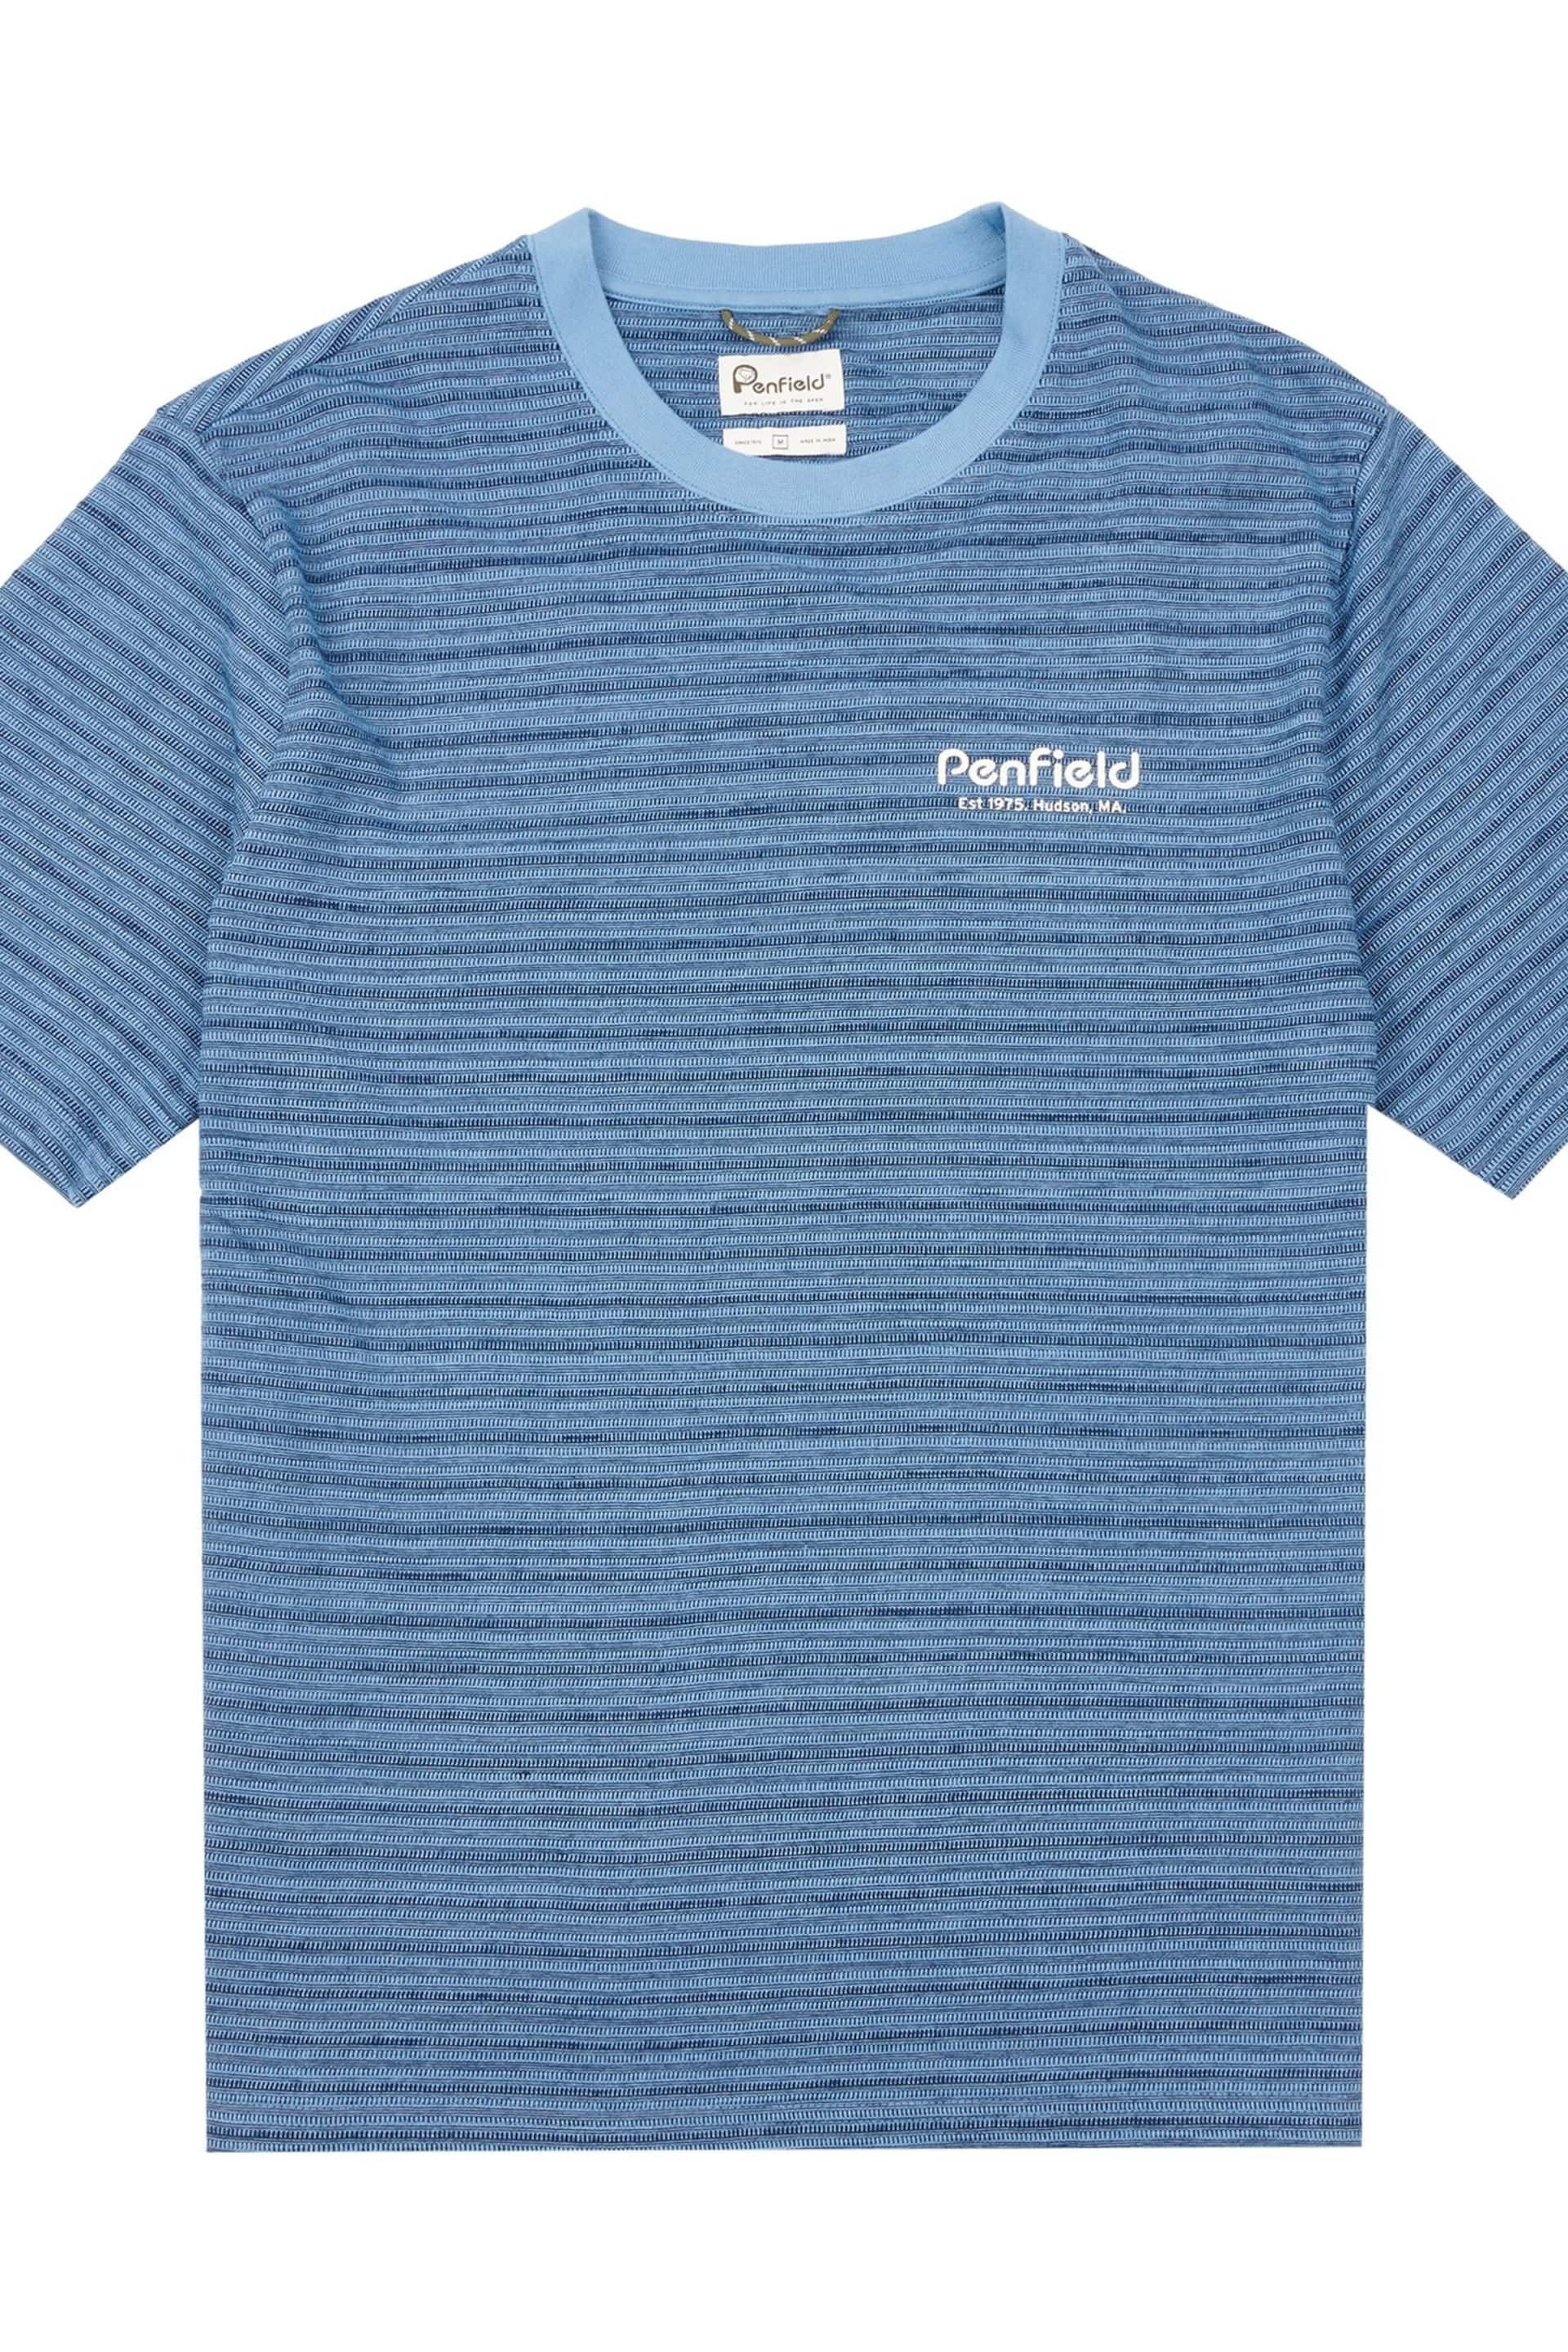 Penfield Blue Textured Striped T-Shirt - Image 4 of 5